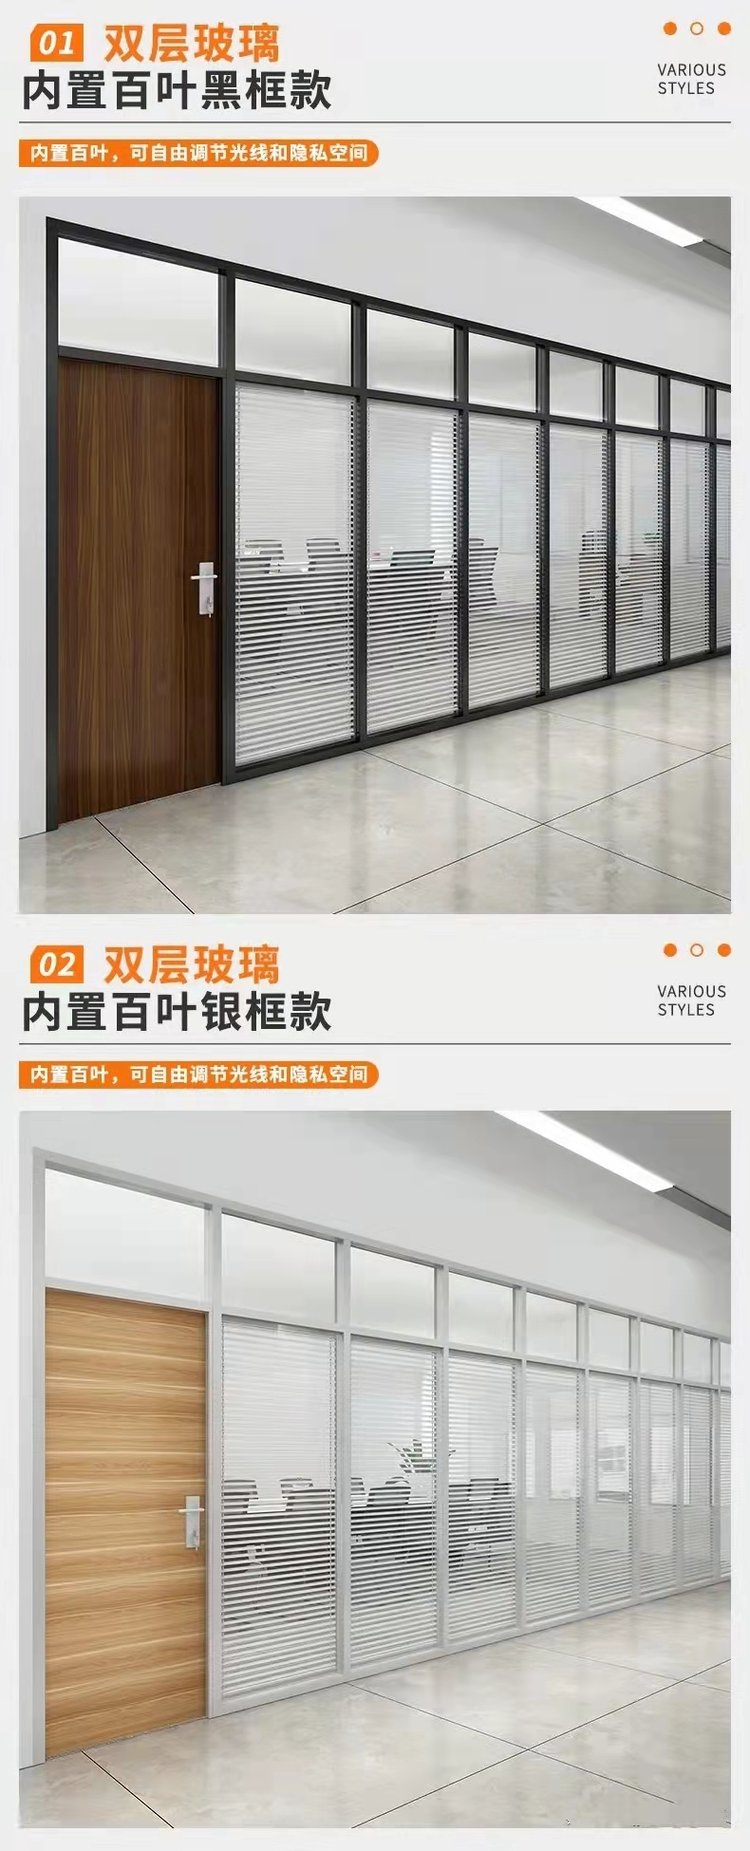 Tempered glass partition hotel partition wall gypsum board light steel keel room